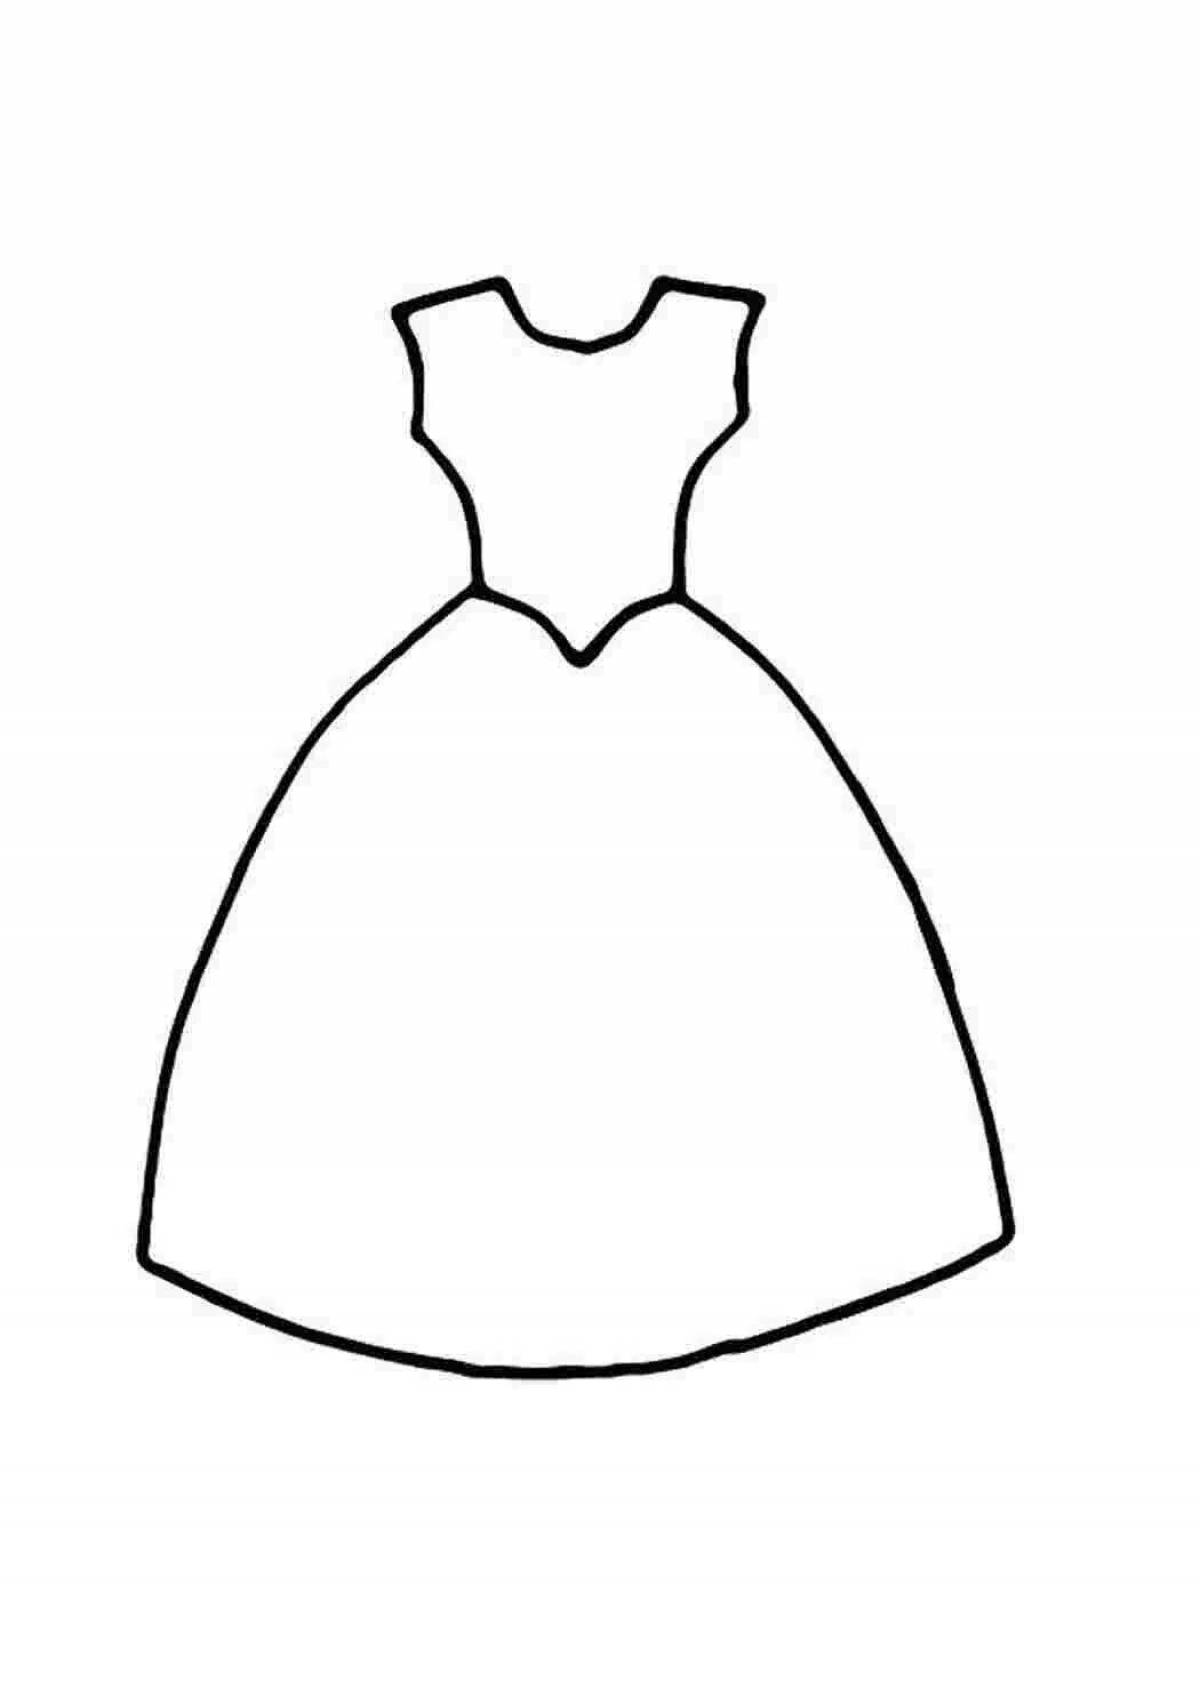 Unique dress coloring page for 4-5 year olds